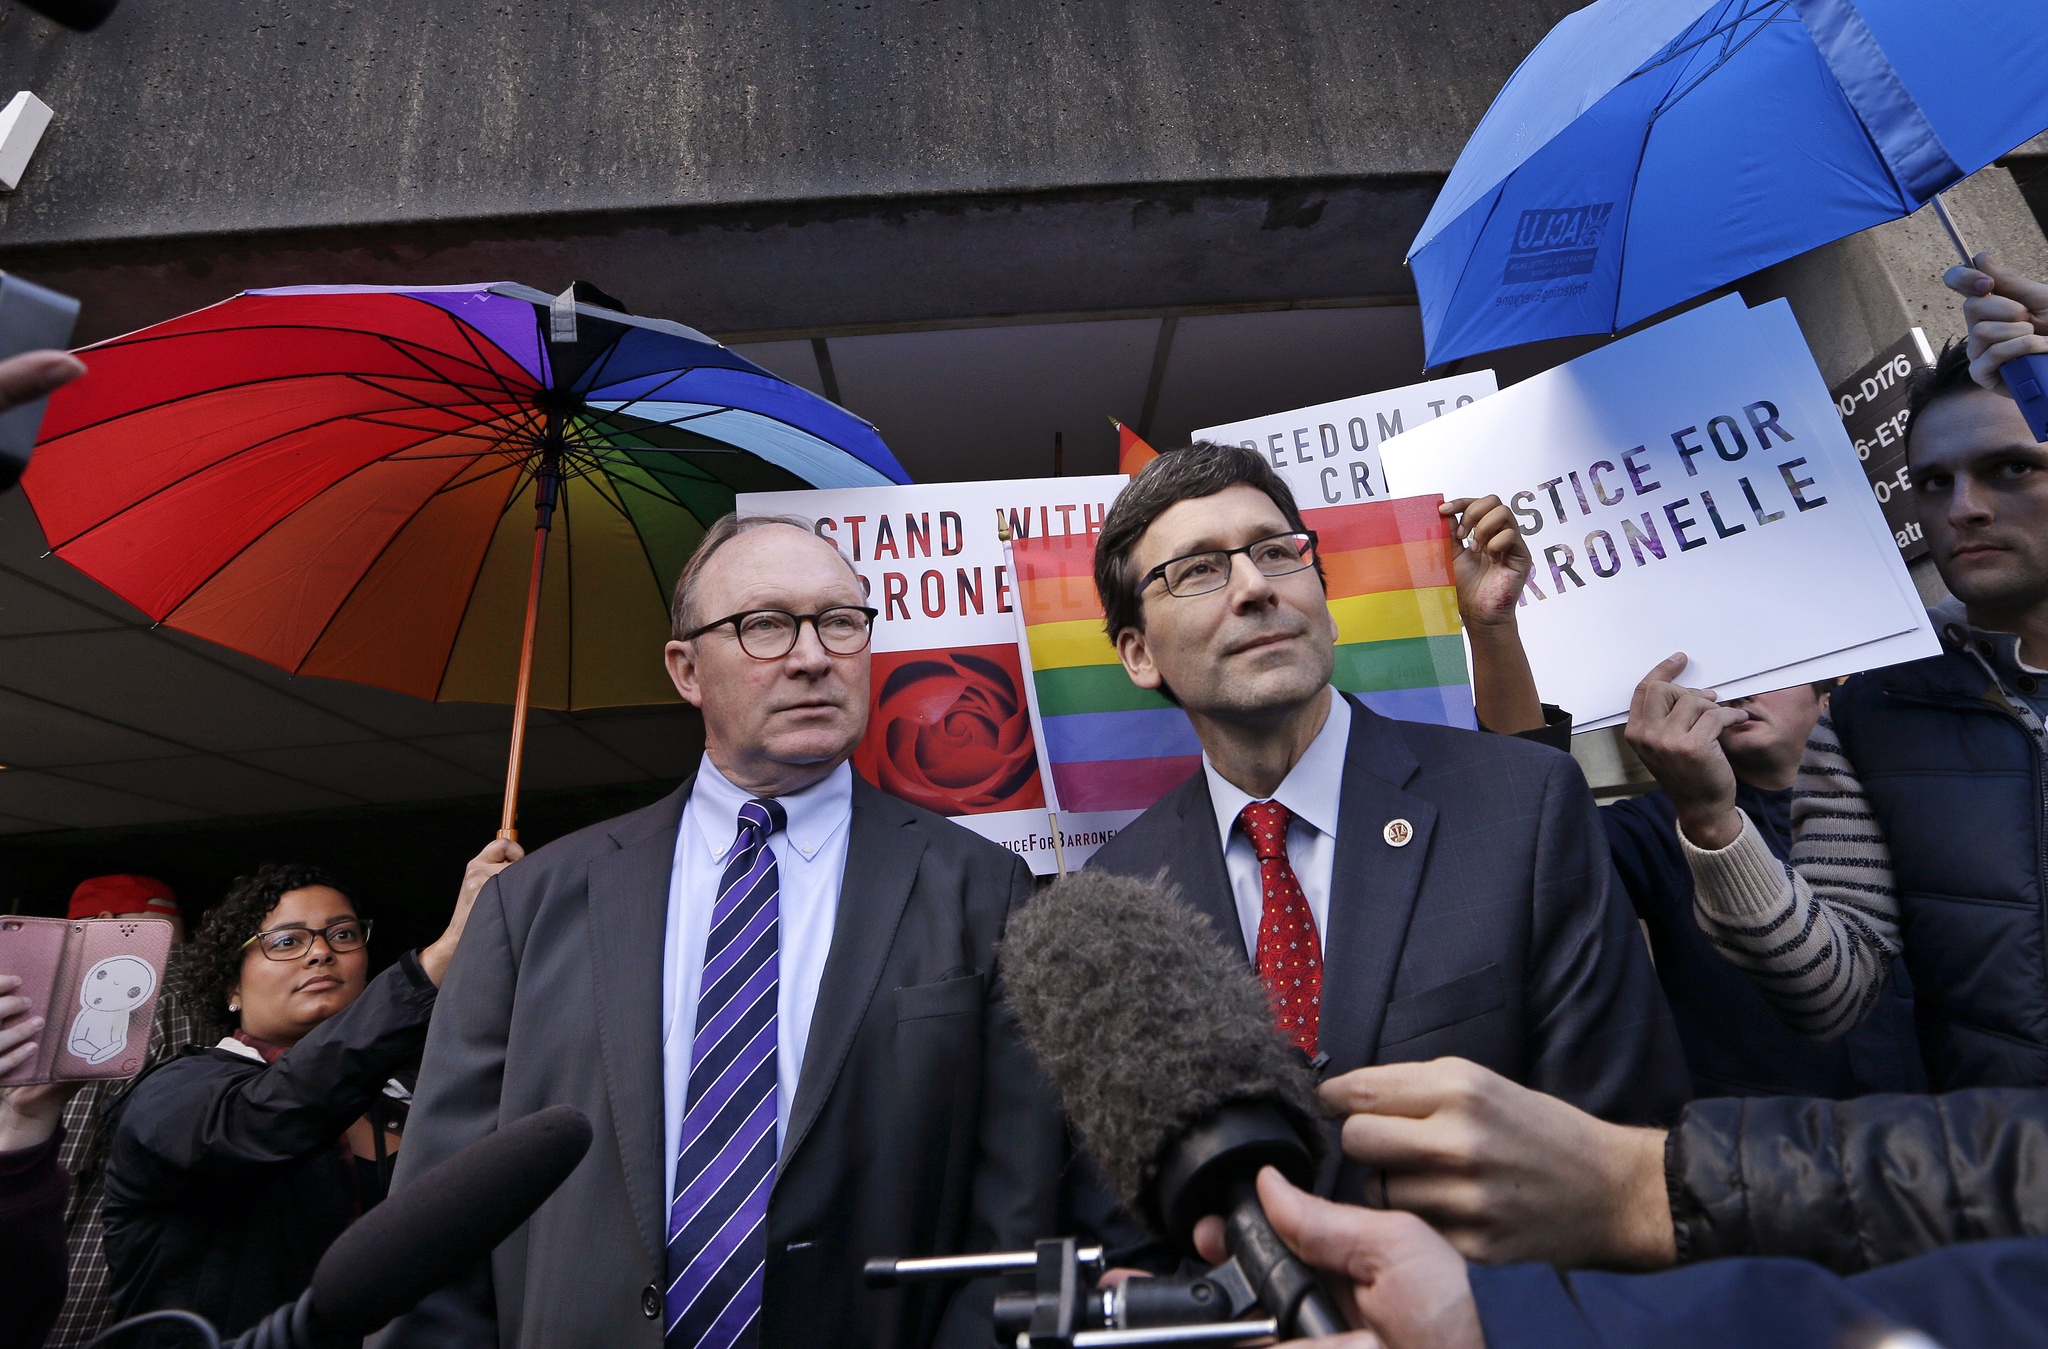 As supporters on both sides of the case vie for position behind, Attorney General Bob Ferguson, right, and ACLU attorney Michael Scott speak with reporters following a hearing Tuesday in Bellevue before Washington’s Supreme Court about a florist who was sued for refusing to provide services for a same sex-wedding. (Elaine Thompson/The Associated Press)